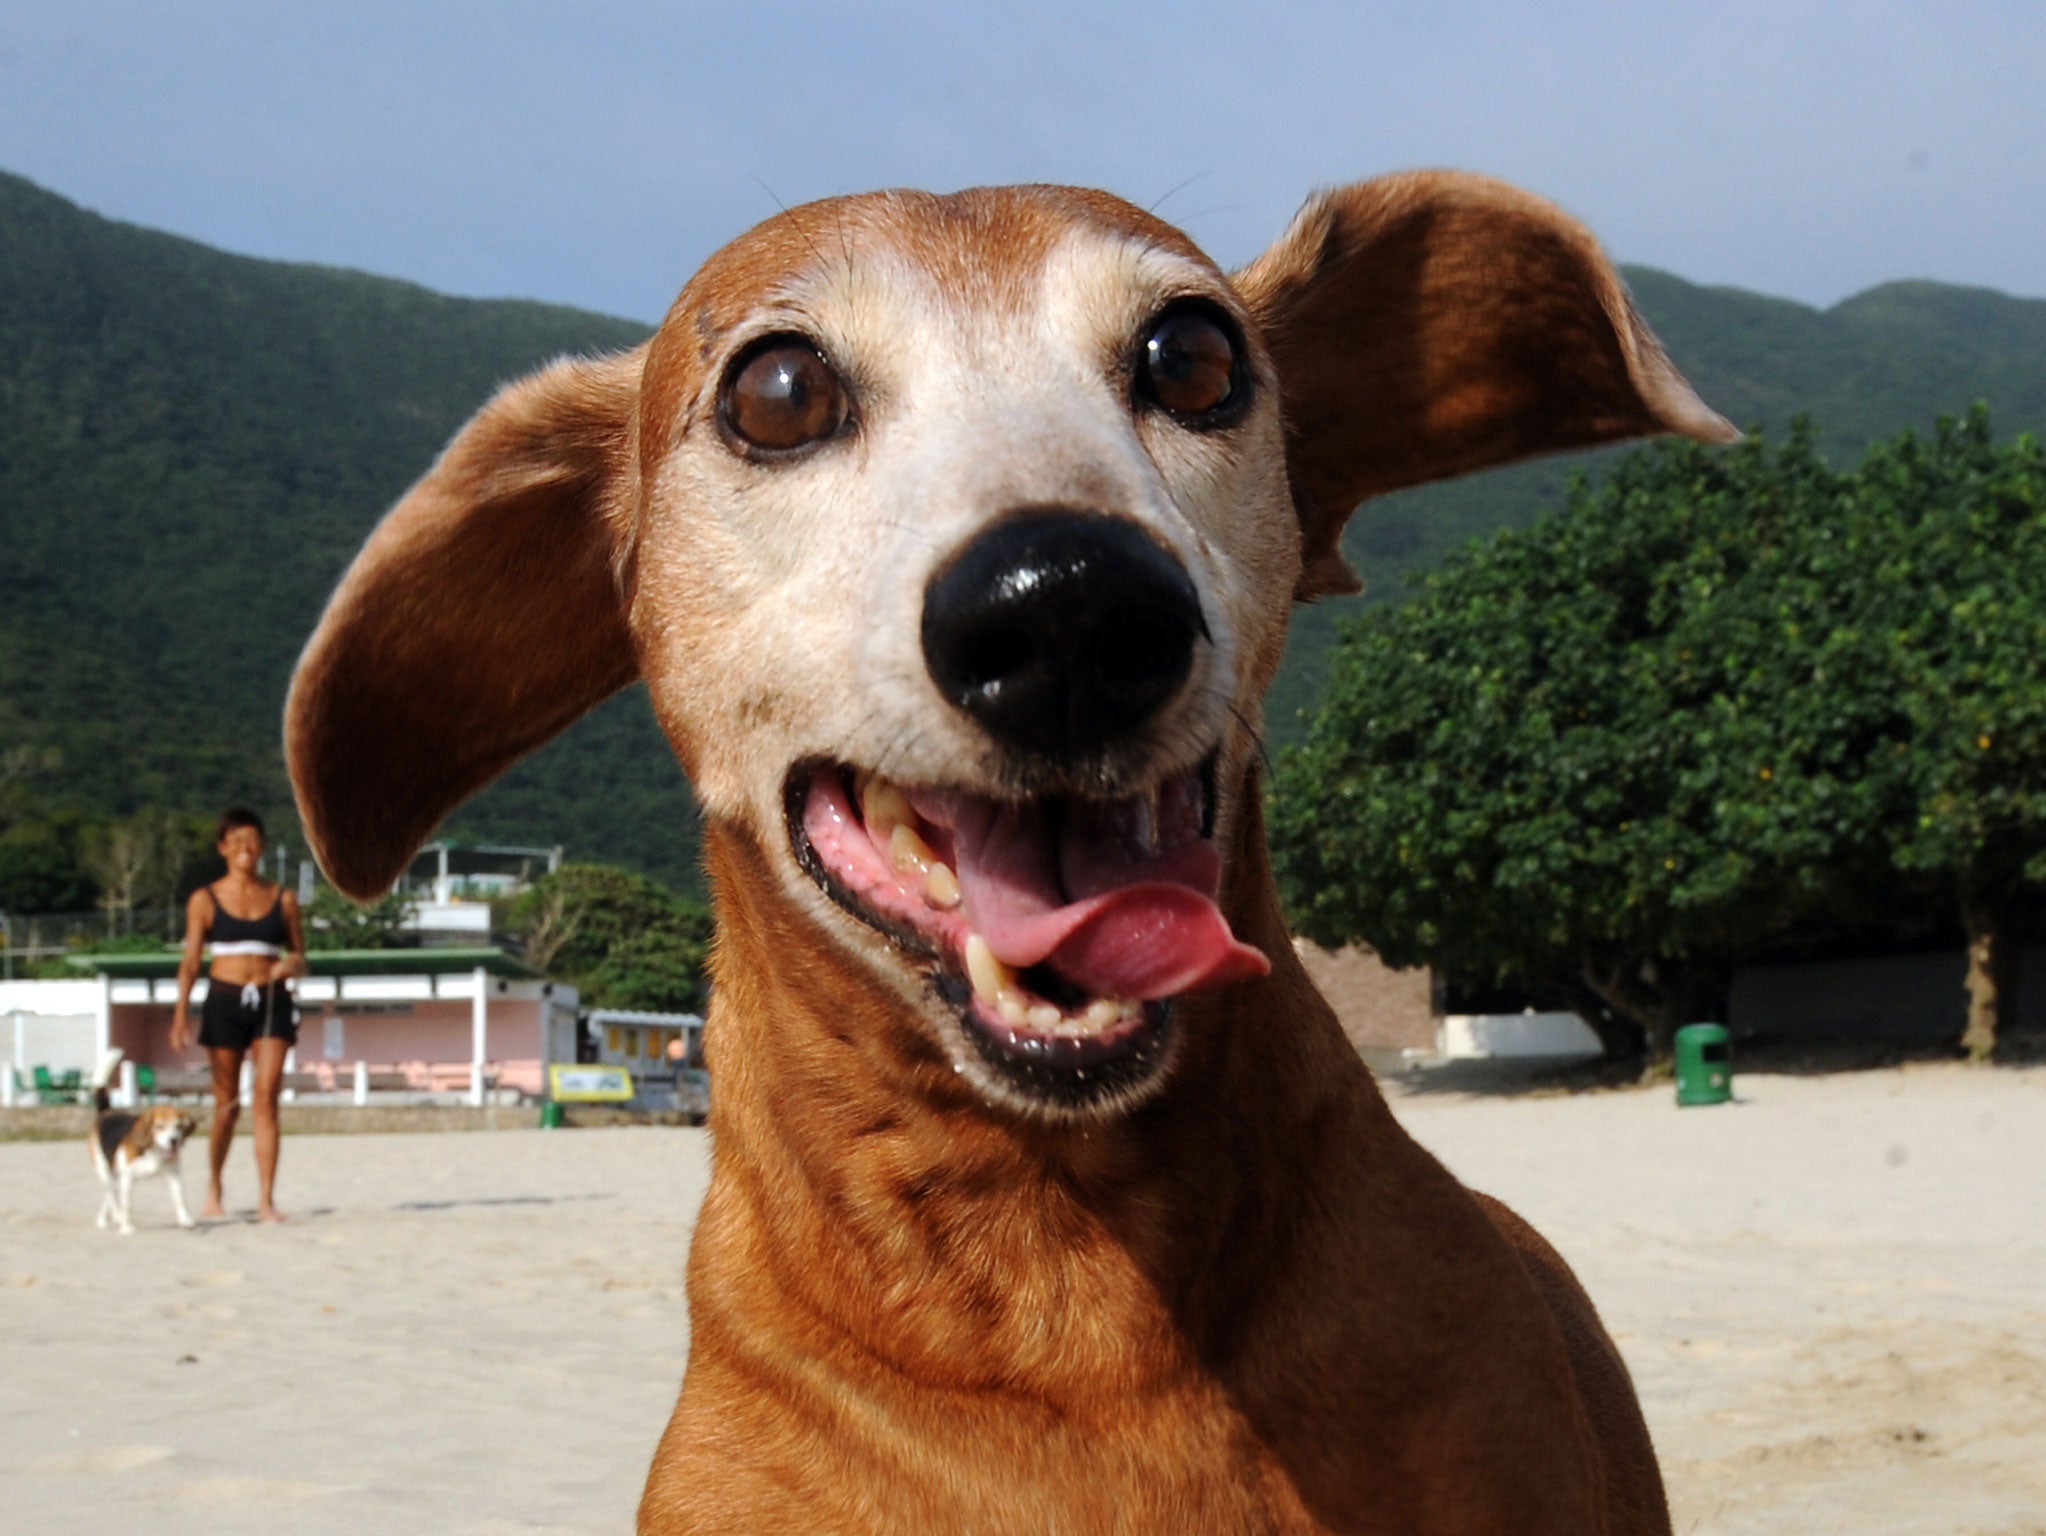 'Ilmar' the Dachshund runs on a beach in Hong Kong on October 20, 2010. Dachshunds were origionally bred to hunt animals such as badgers, and although comical in appearance they make excellent hunters, using their short legs, fearless personalities and relatively powerful jaws to catch and eradicate rats, snakes and the like.